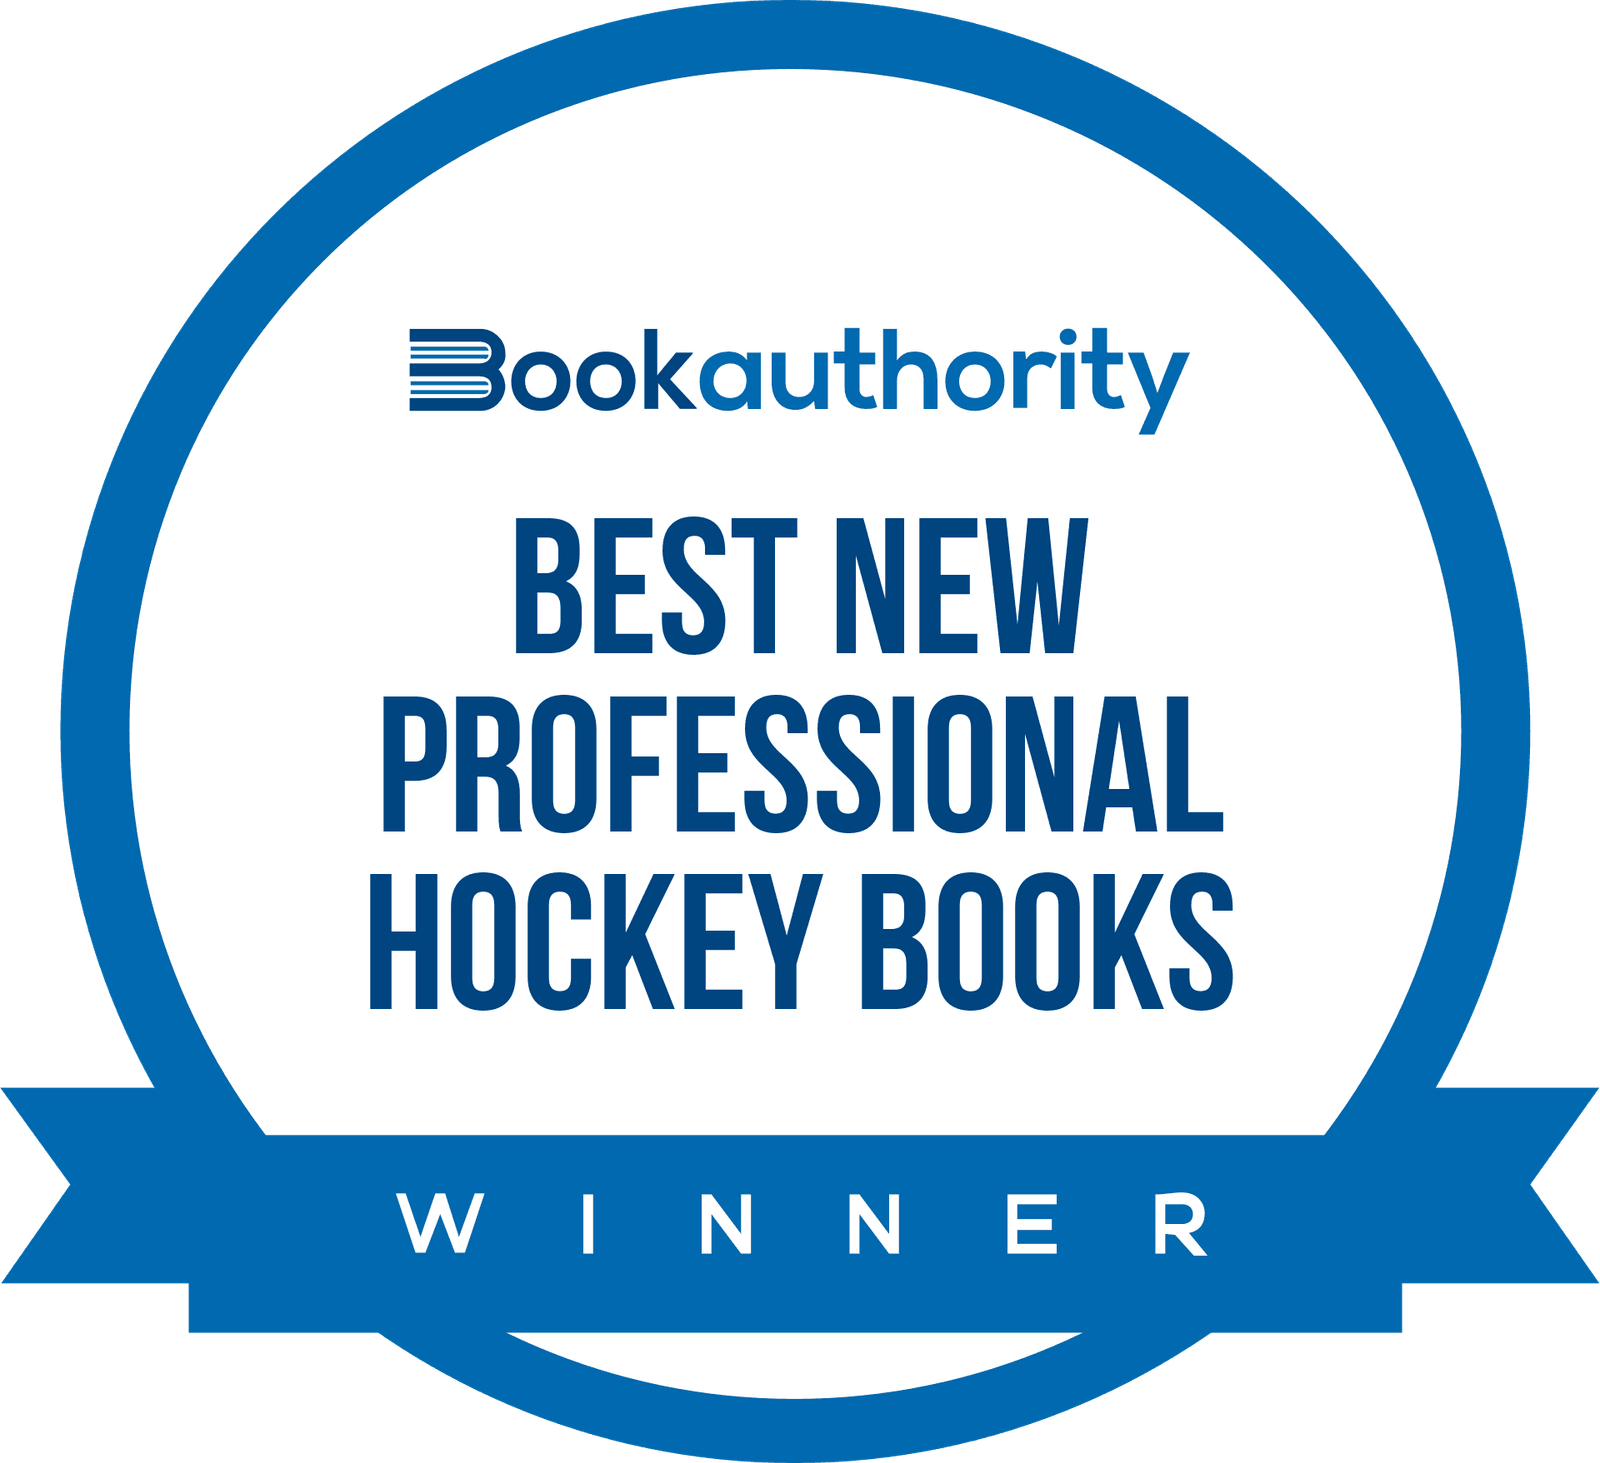 A Storm In Carolina is named one of the best new professional hockey books by BookAuthority